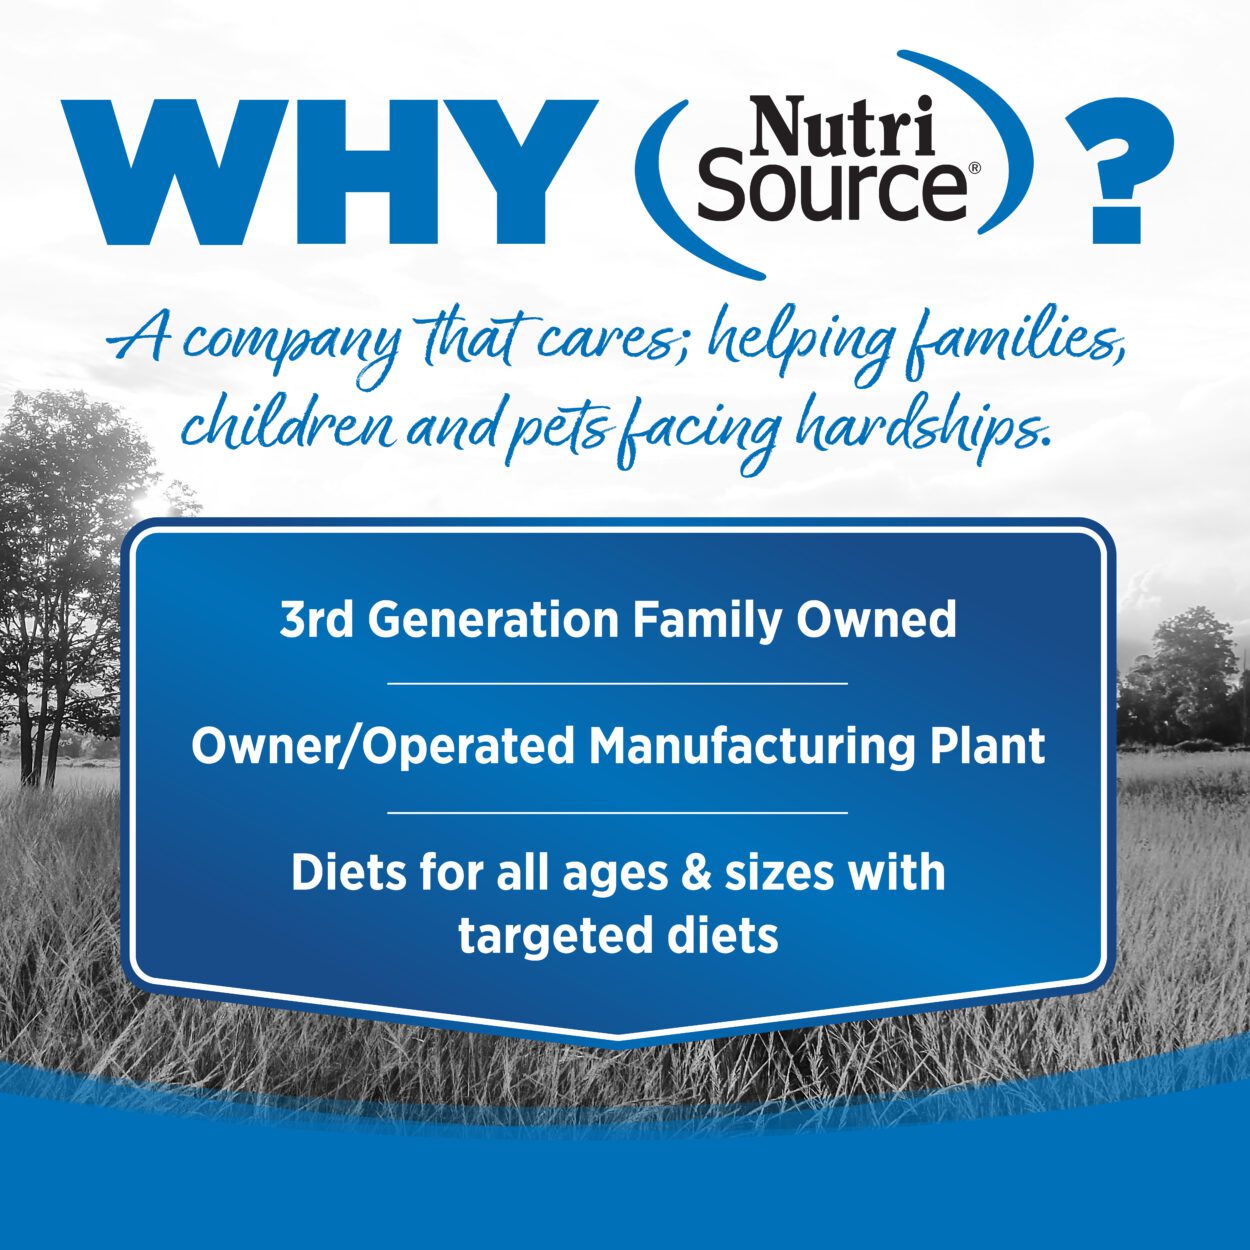 WHY NutriSource?